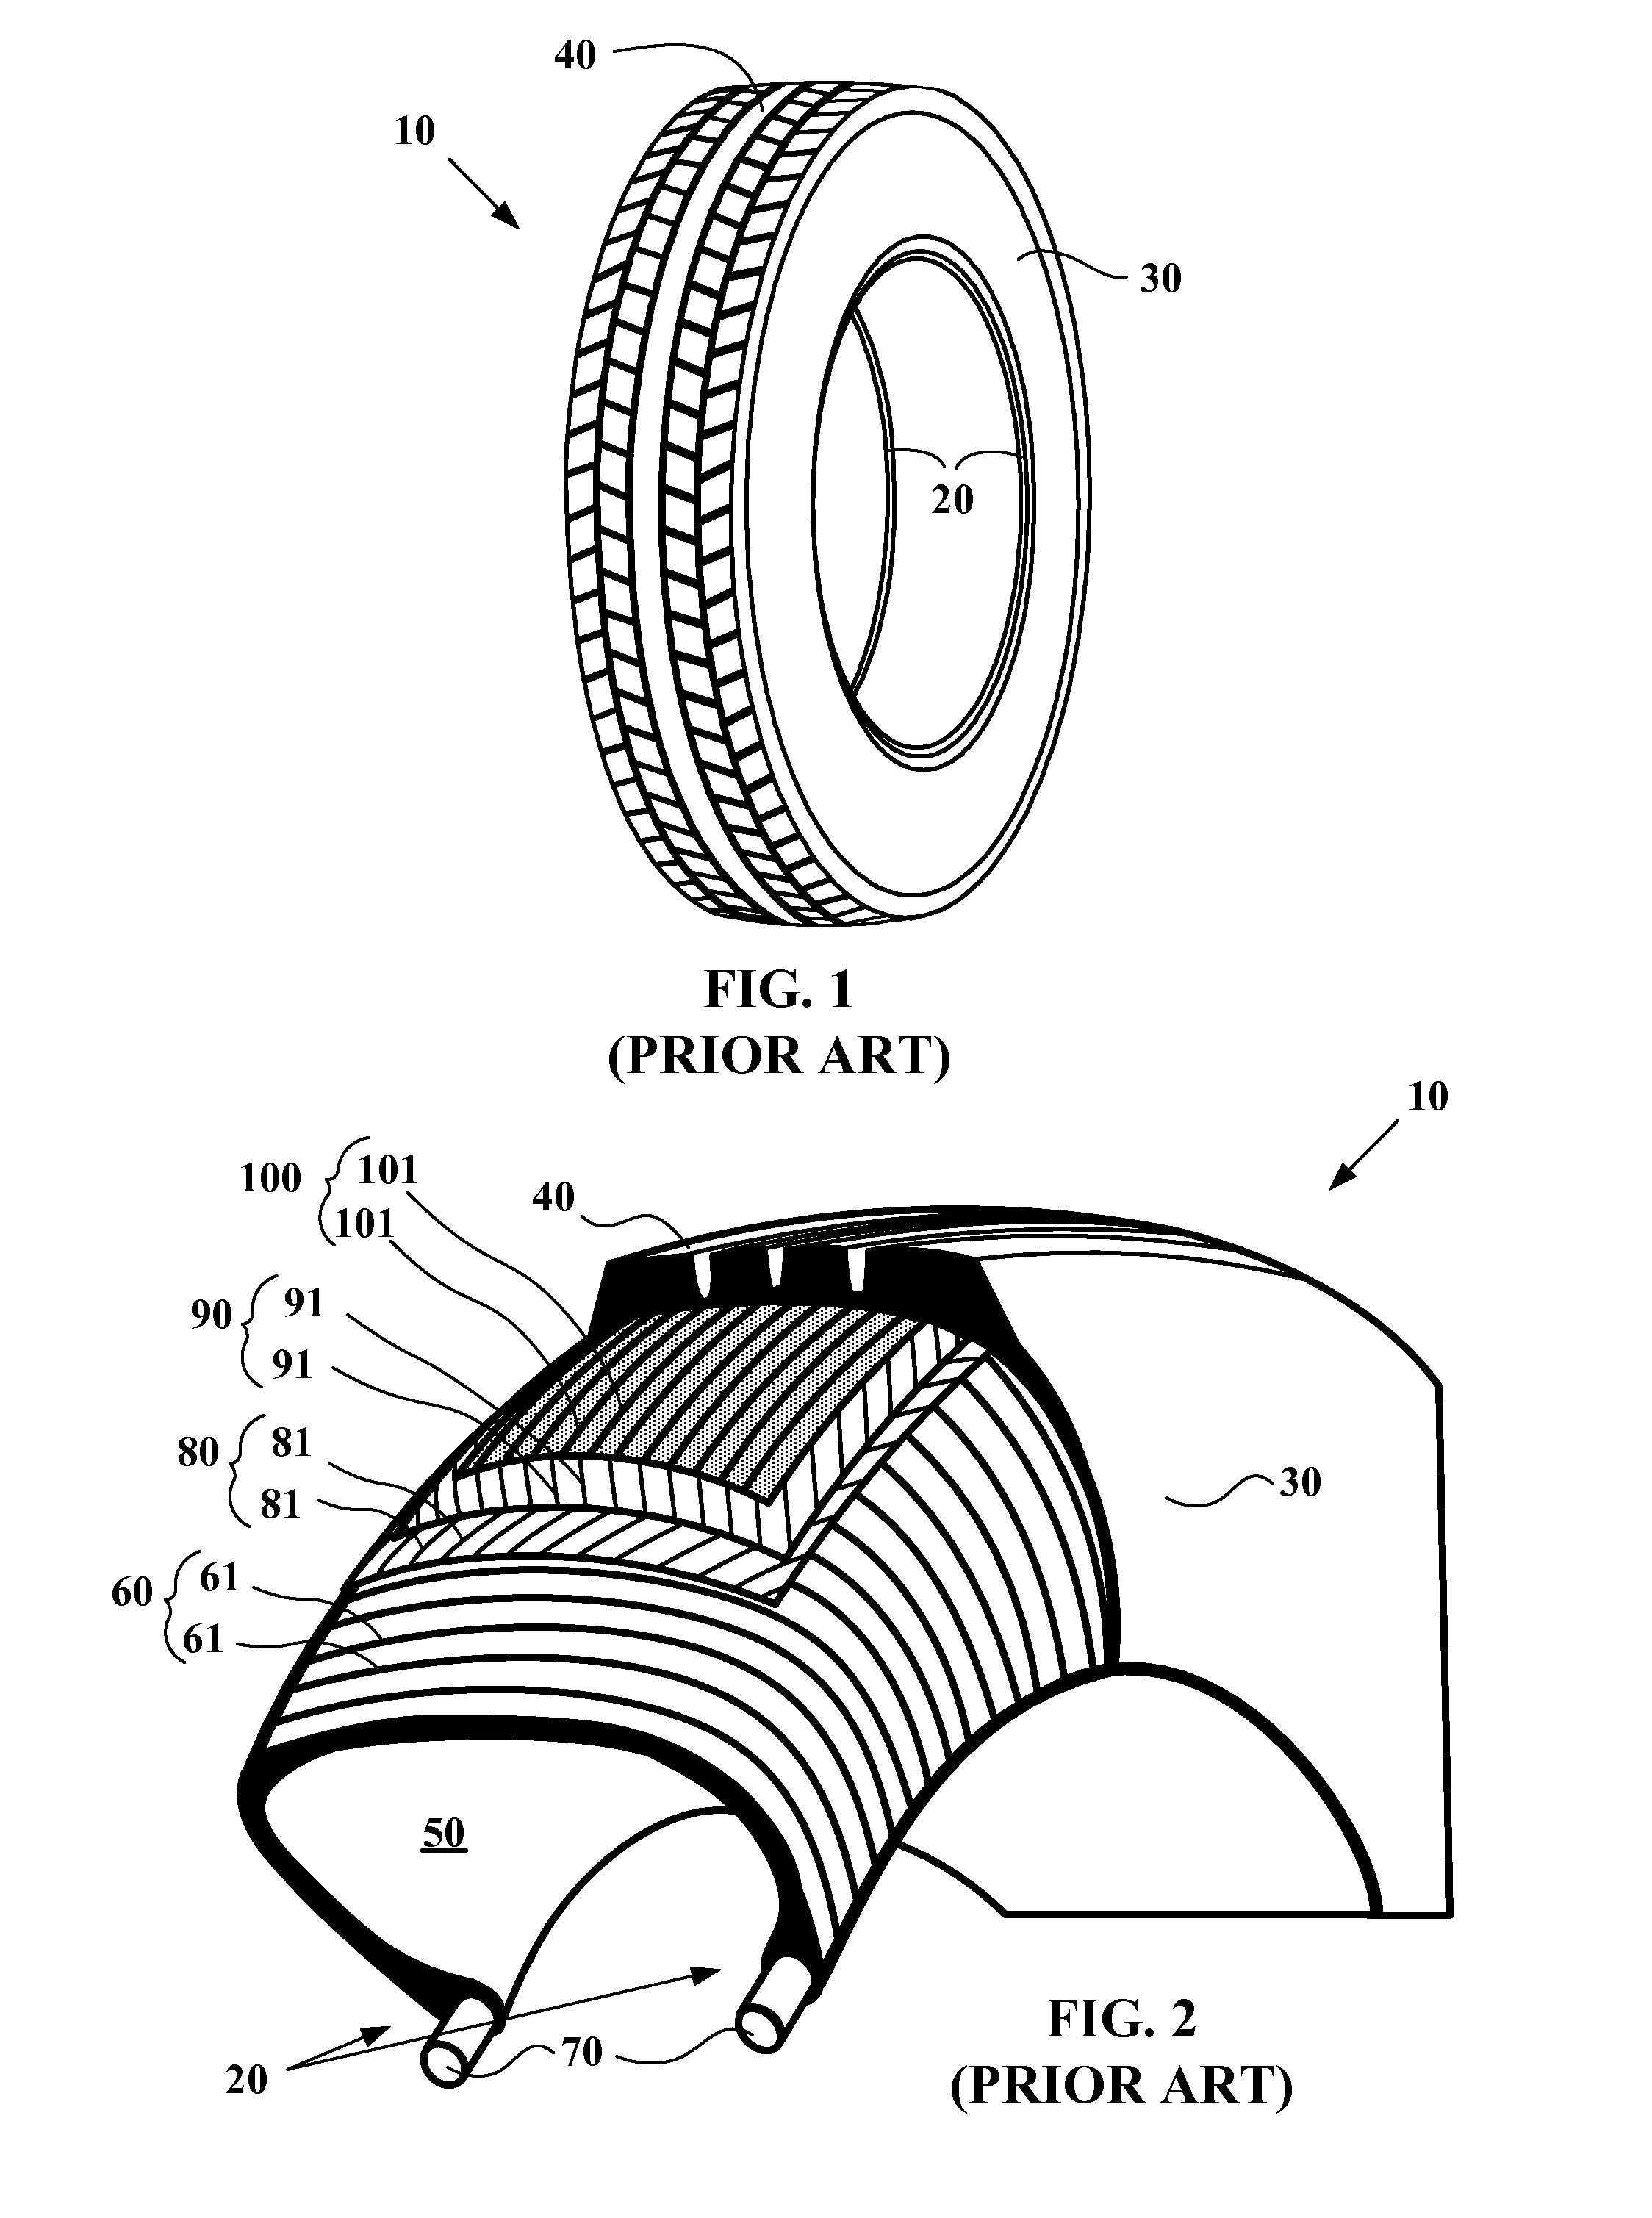 Tire with improved beads